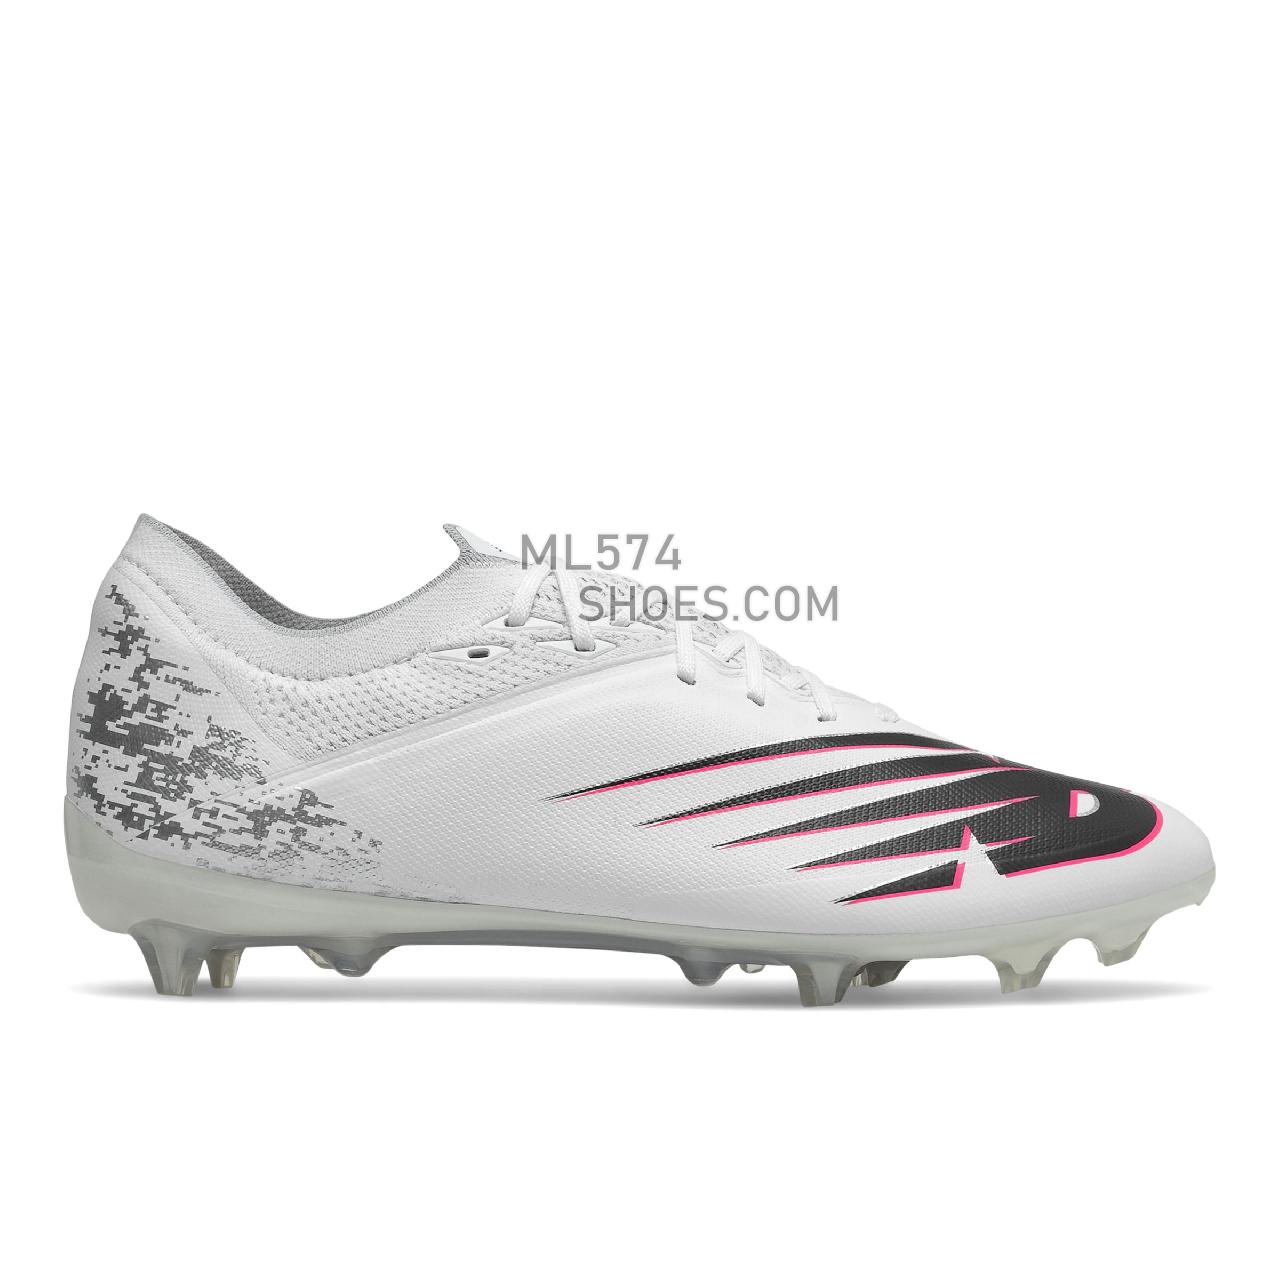 New Balance Furon V6+ Destroy FG - Men's Soccer - White with Silver and Alpha Pink - MSF2FP65